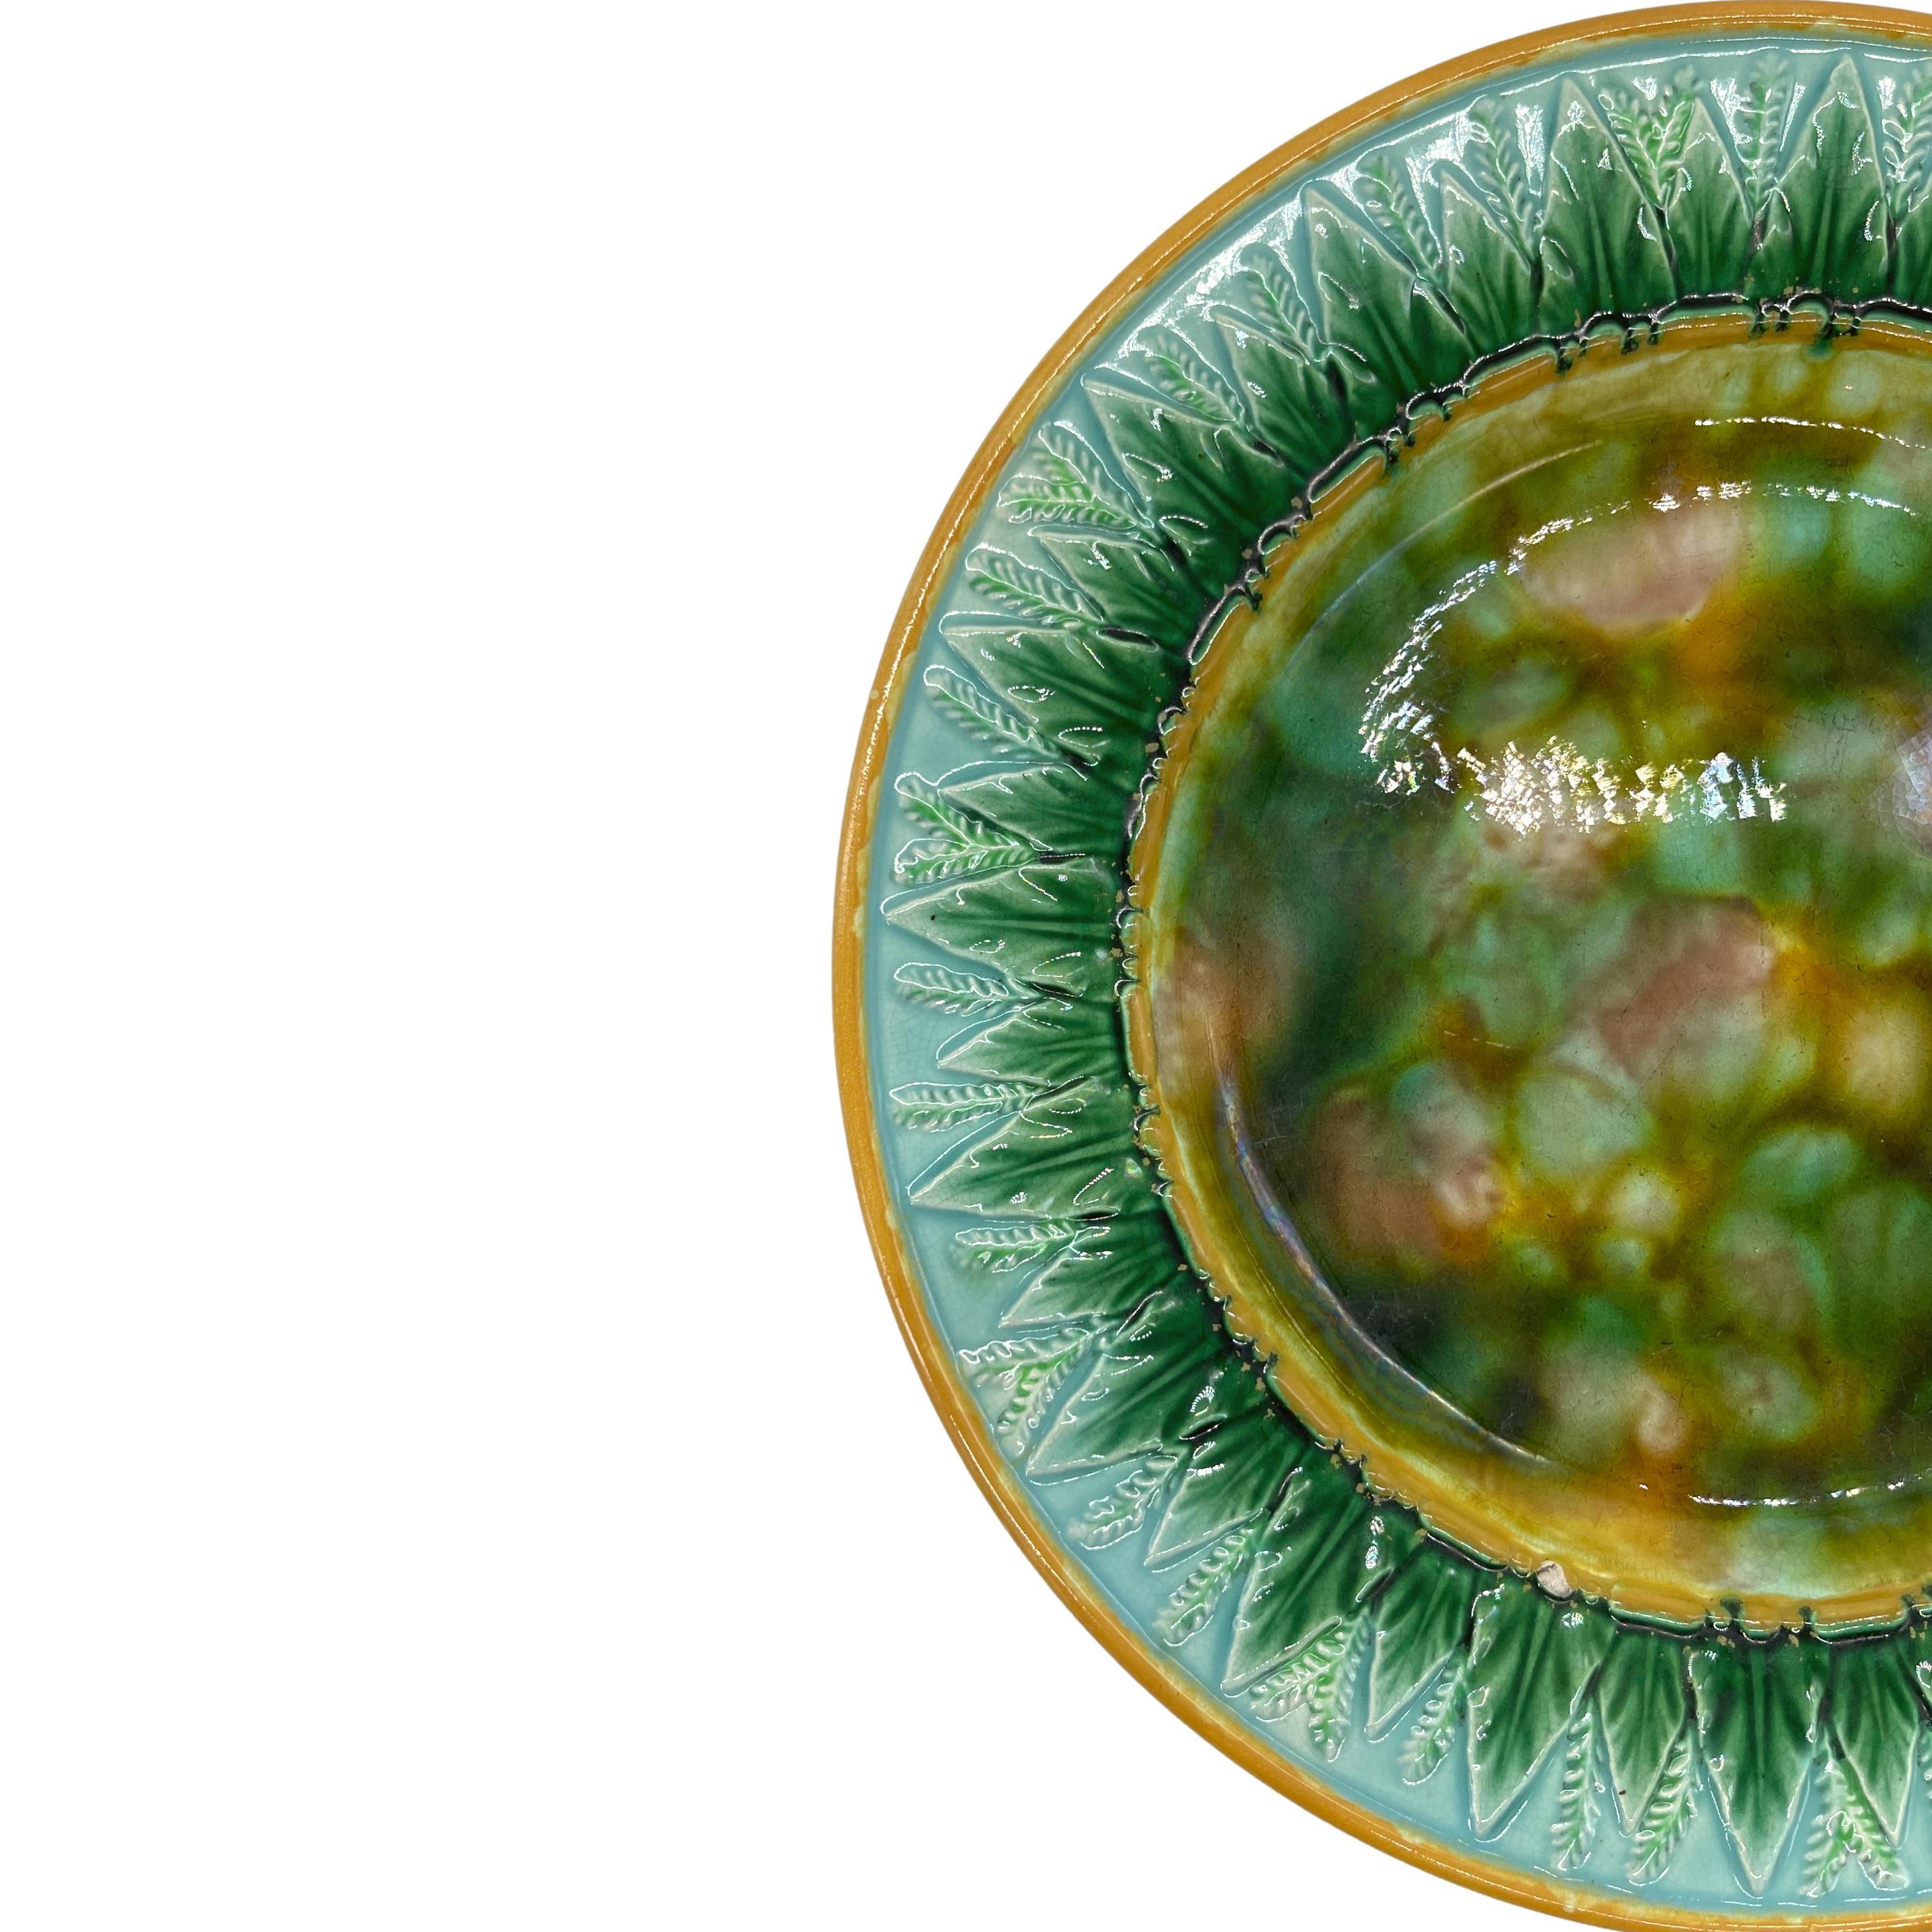 George Jones Majolica Plate, the Center with Tortoiseshell Mottling, the 9.25-in plate with Tortoiseshell Mottling to the center, bordered with green-glazed stylized stiff wheat leaves and wheat stalks on a turquoise-glazed ground, the inner and